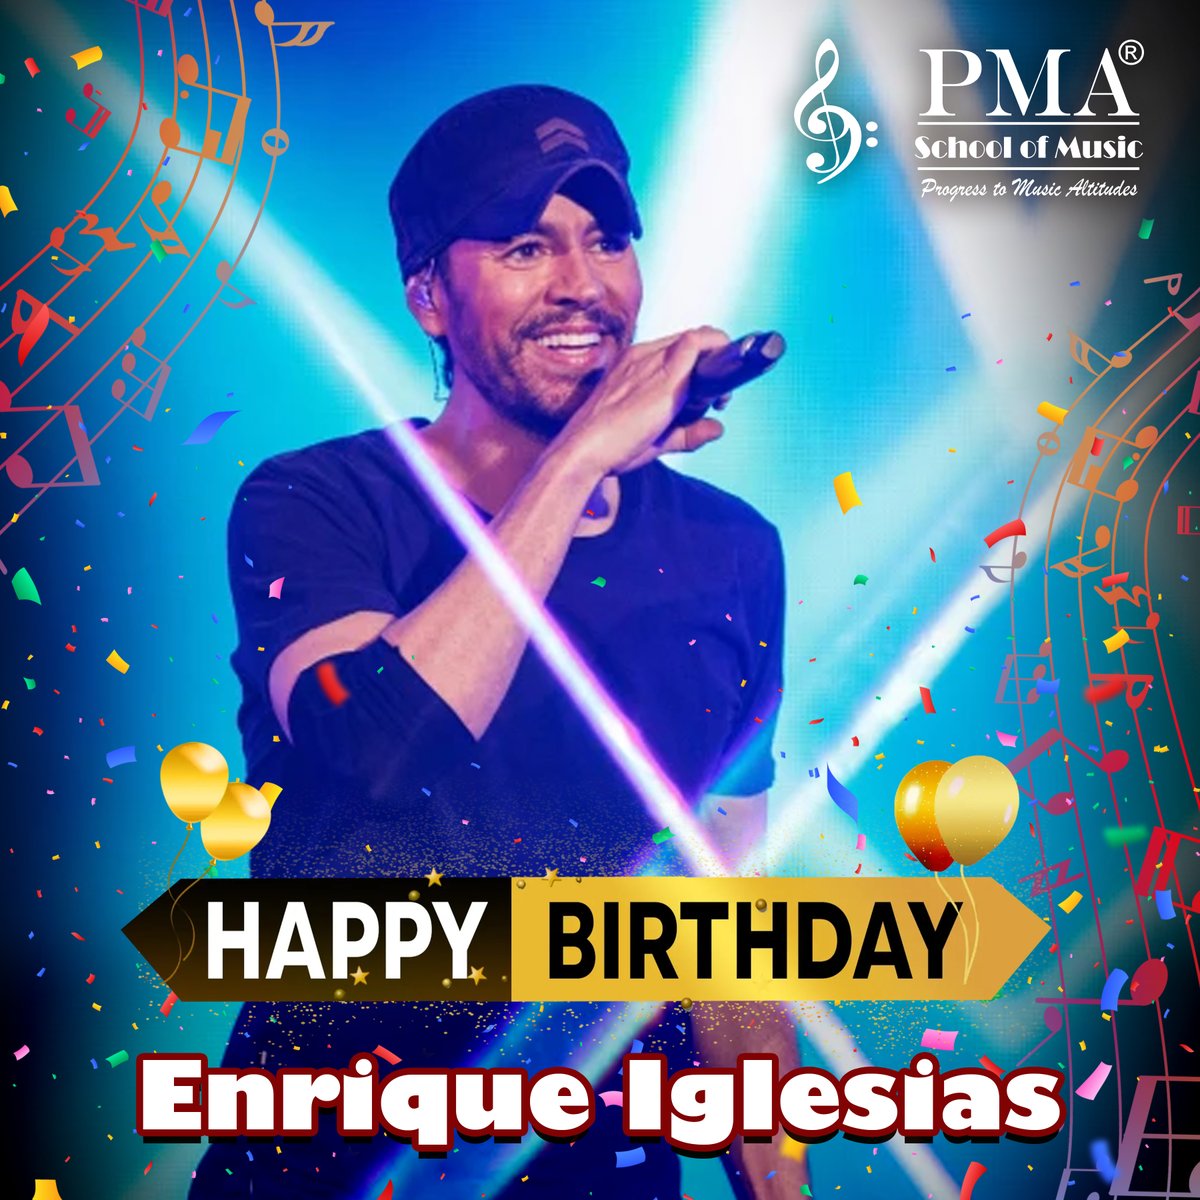 Happy Birthday, @enriqueiglesias 🎉🎶 From all of us at PMA School of Music, we celebrate your incredible journey and the music that inspires us all! Keep shining and singing! 🎤🌟 #HappyBirthdayEnrique #MusicInspiration #Spotify #latinpop #TrendingNow